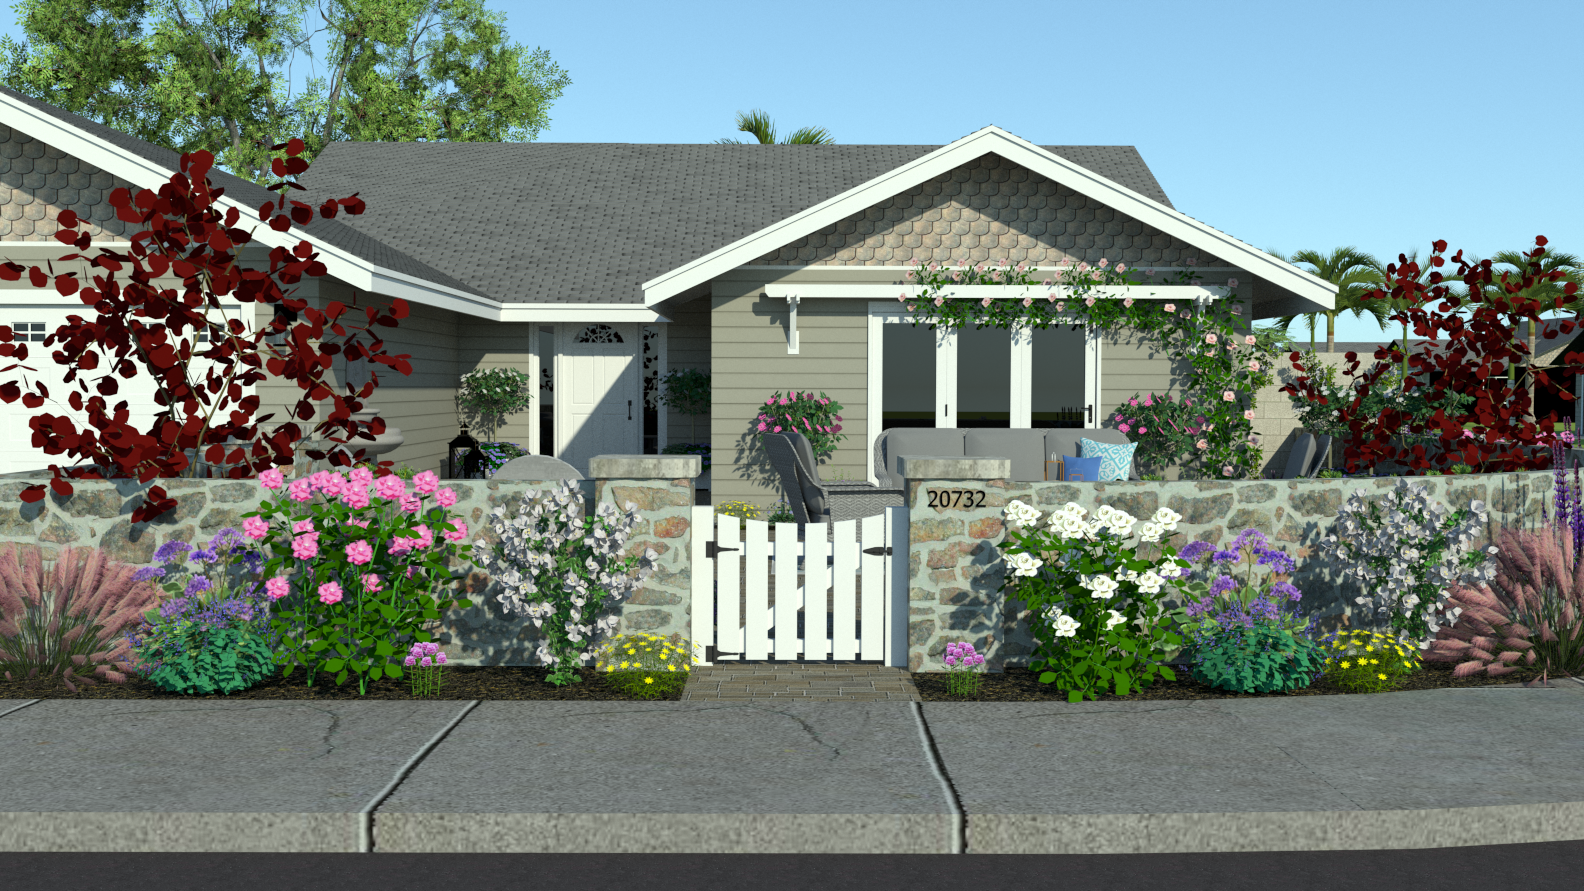 AutoSave_ANNA AND GREG FERREE_12-28-2016_SKETCHUP-2016-FRONT GARDEN_1-Scene 1.png